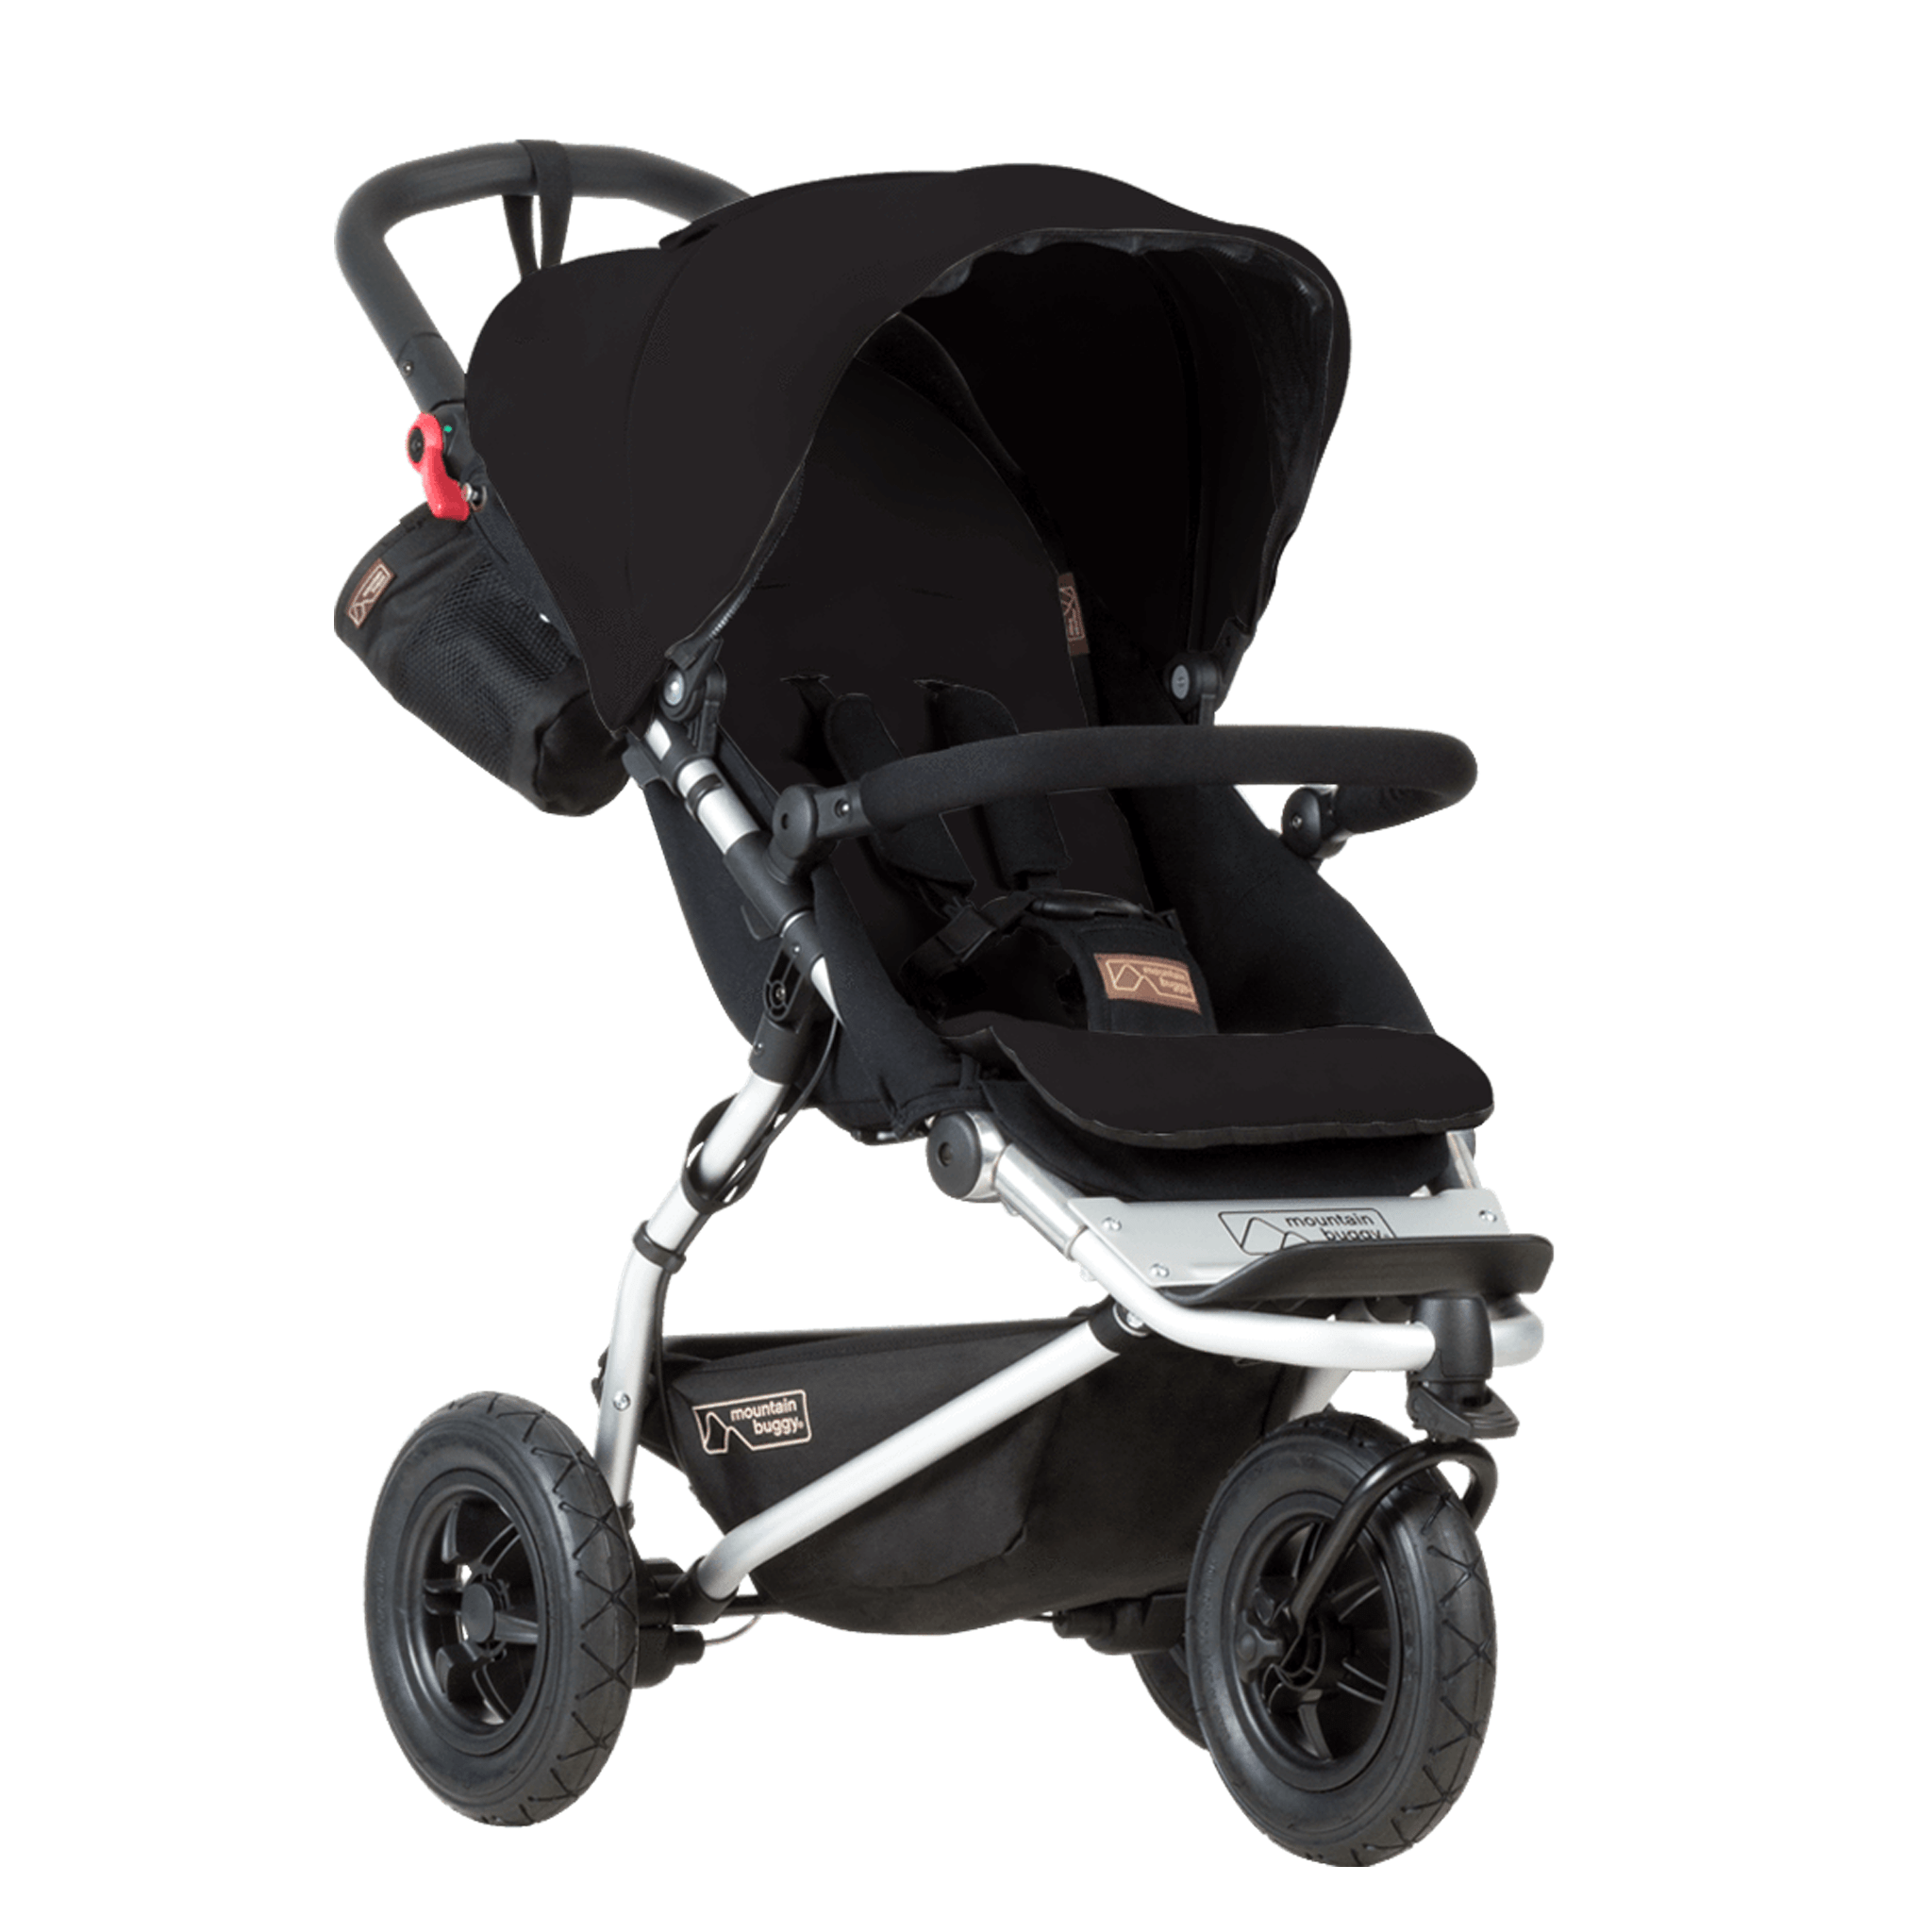 Mountain Buggy 3 wheel pushchairs Mountain Buggy New Swift 3.2 Pushchair Black SW1-V3.2-5